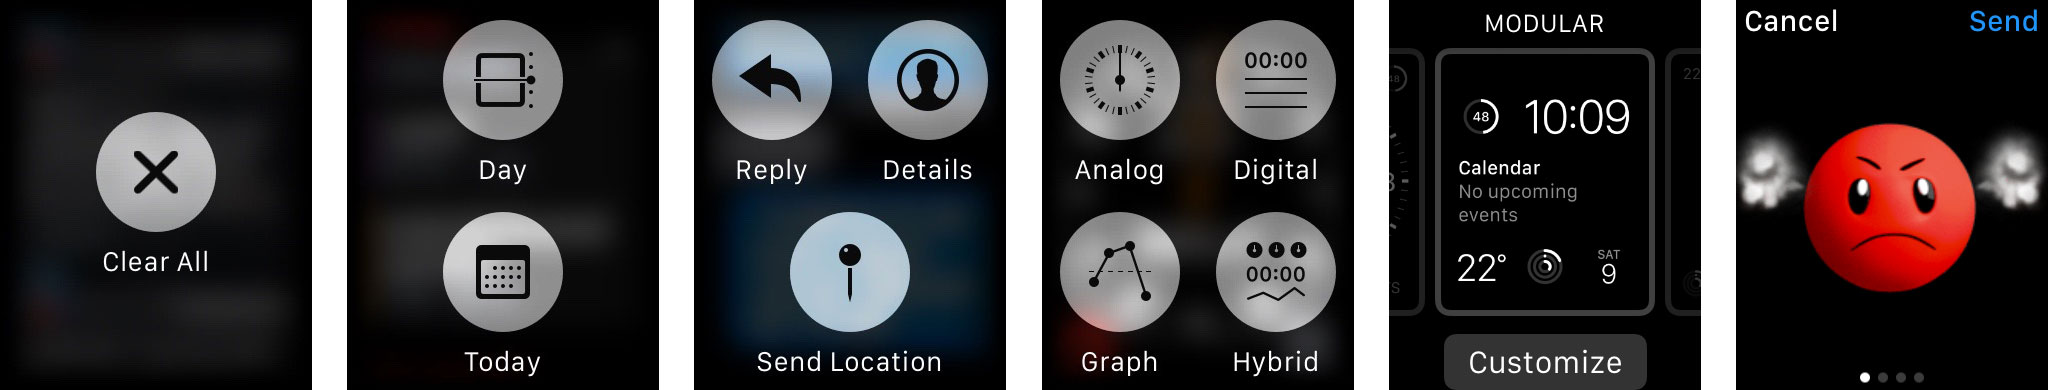 Force Touch options, switching clock faces, and cycling emoji colors